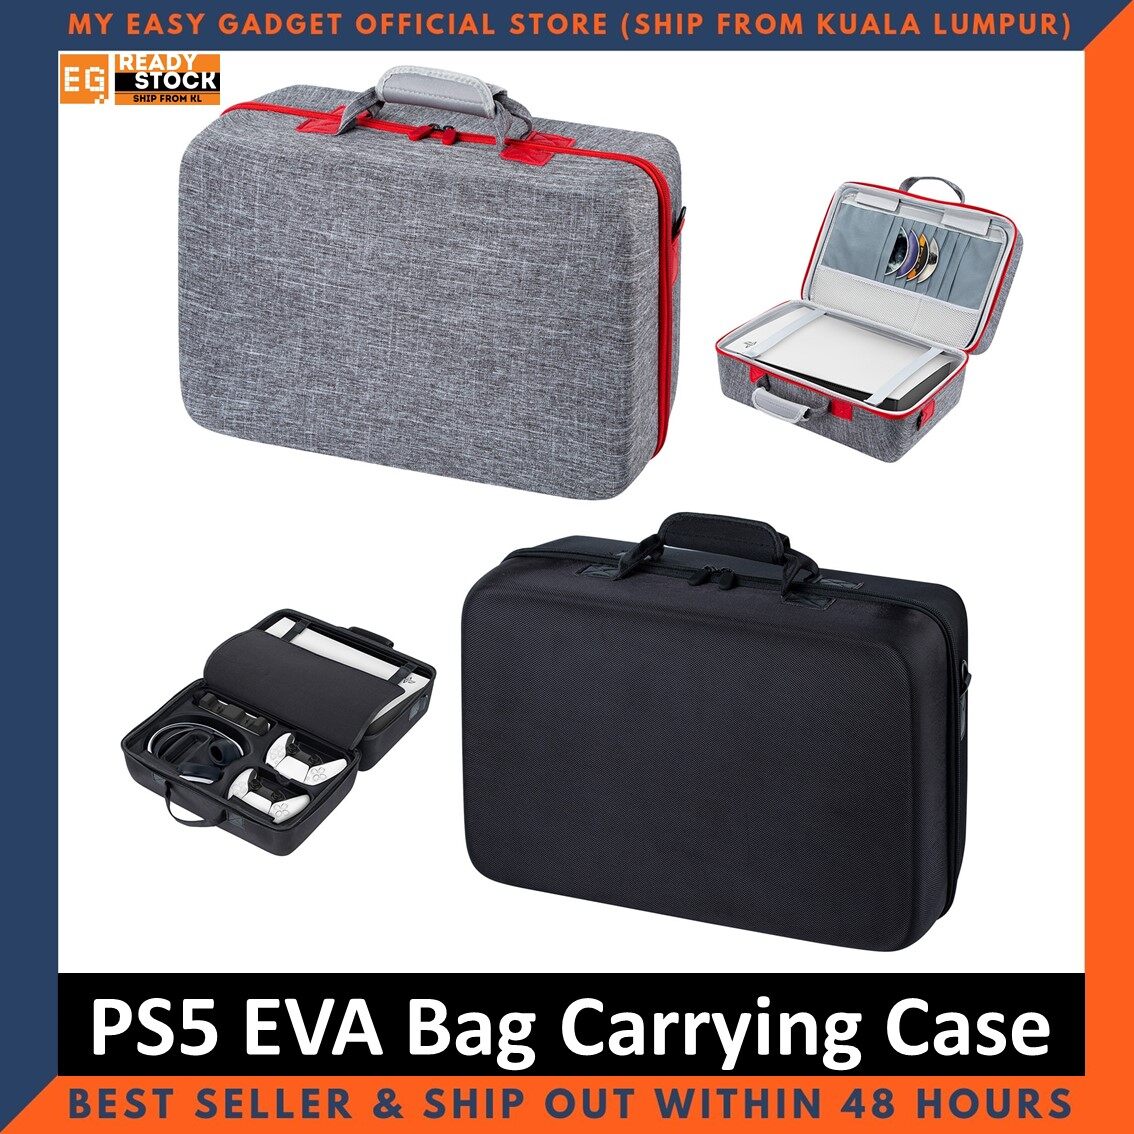 PS5 Bag Waterproof Hard Shell Carrying Case EVA Protective Travel Storage Bag for PlayStation 5 Console , Controller & Headsets